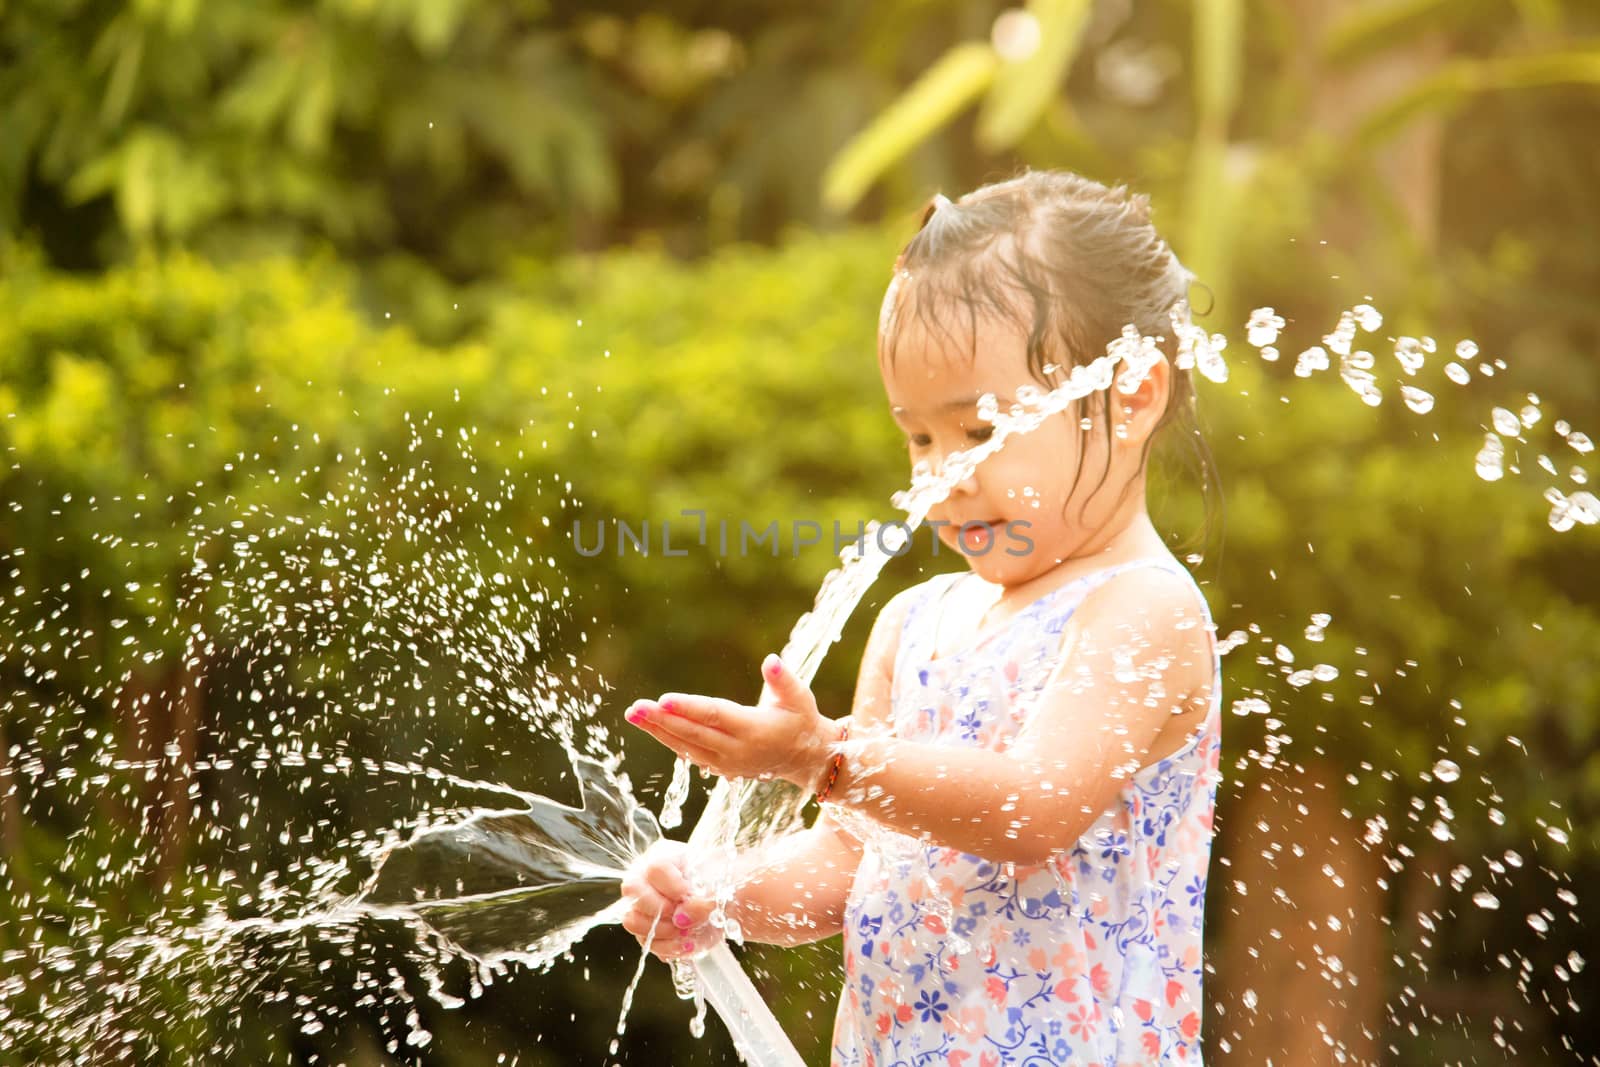 Cute little girl playing a rubber hose spraying water with sunli by TEERASAK